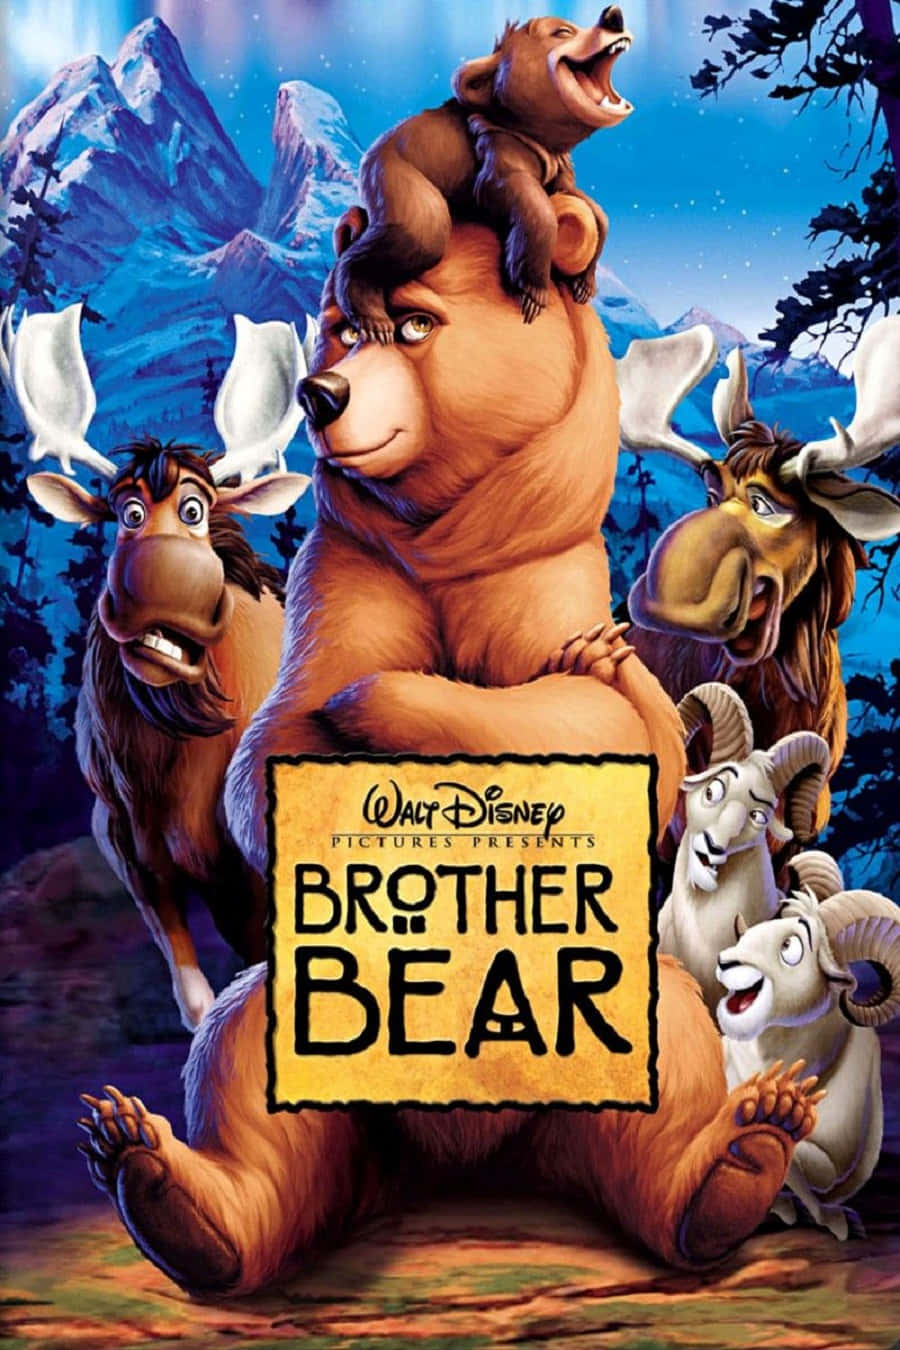 Brother Bear learns and appreciates the importance of family